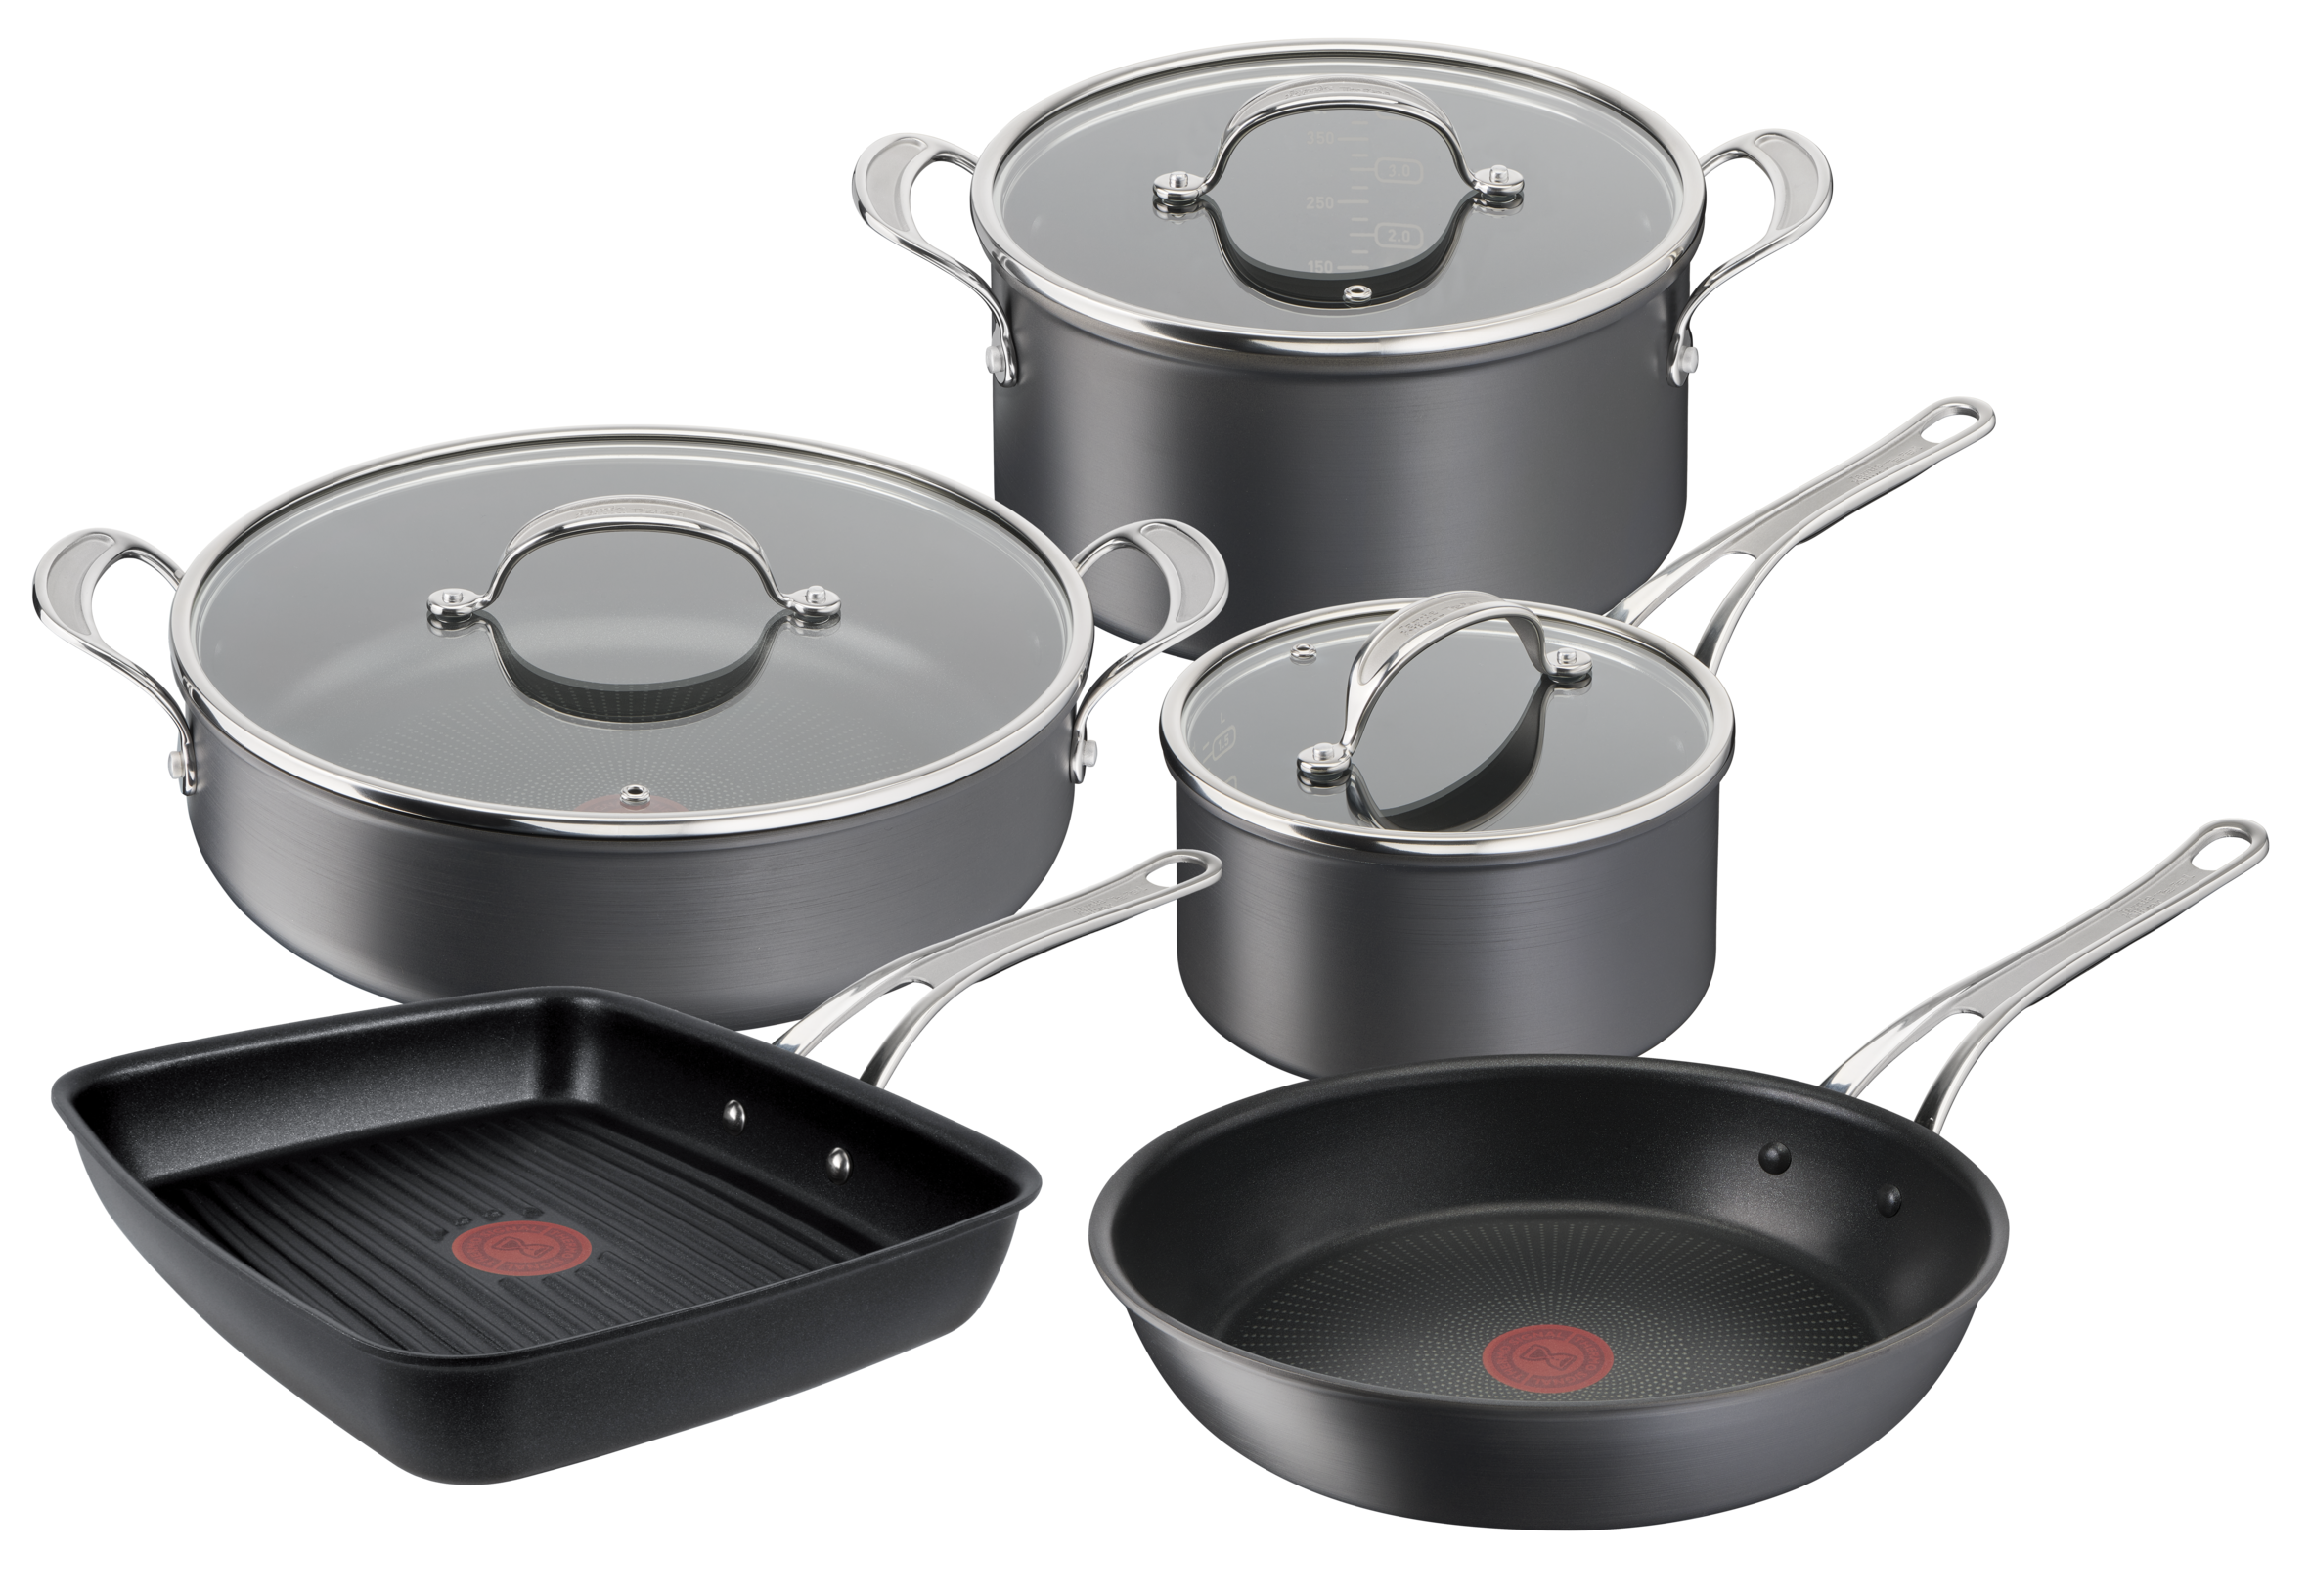 Jamie Oliver by Tefal Cook's Classics Induction Non-Stick Hard Anodised 5-Piece Cookware Set